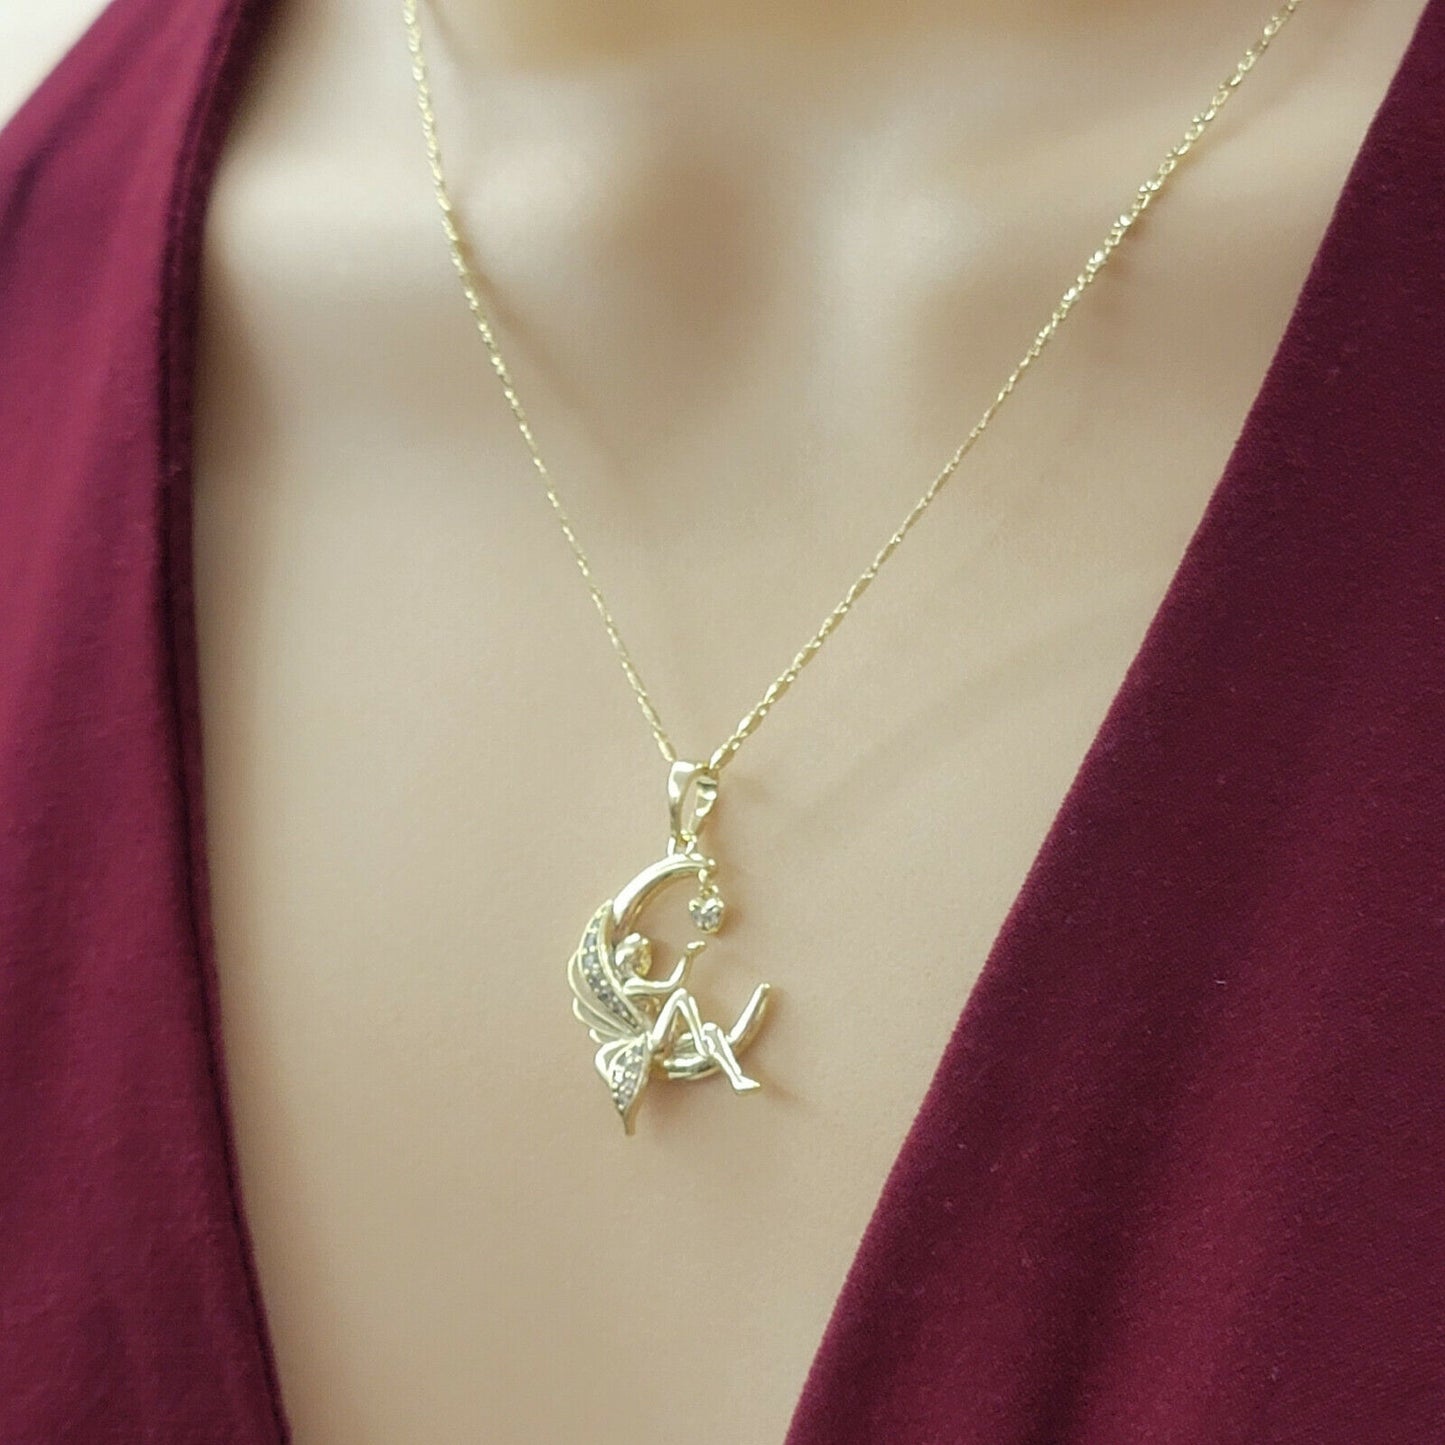 Necklaces - 14K Gold Plated. Fairy in the Moon touching a Heart Pendant & Chain. CZ Crystal